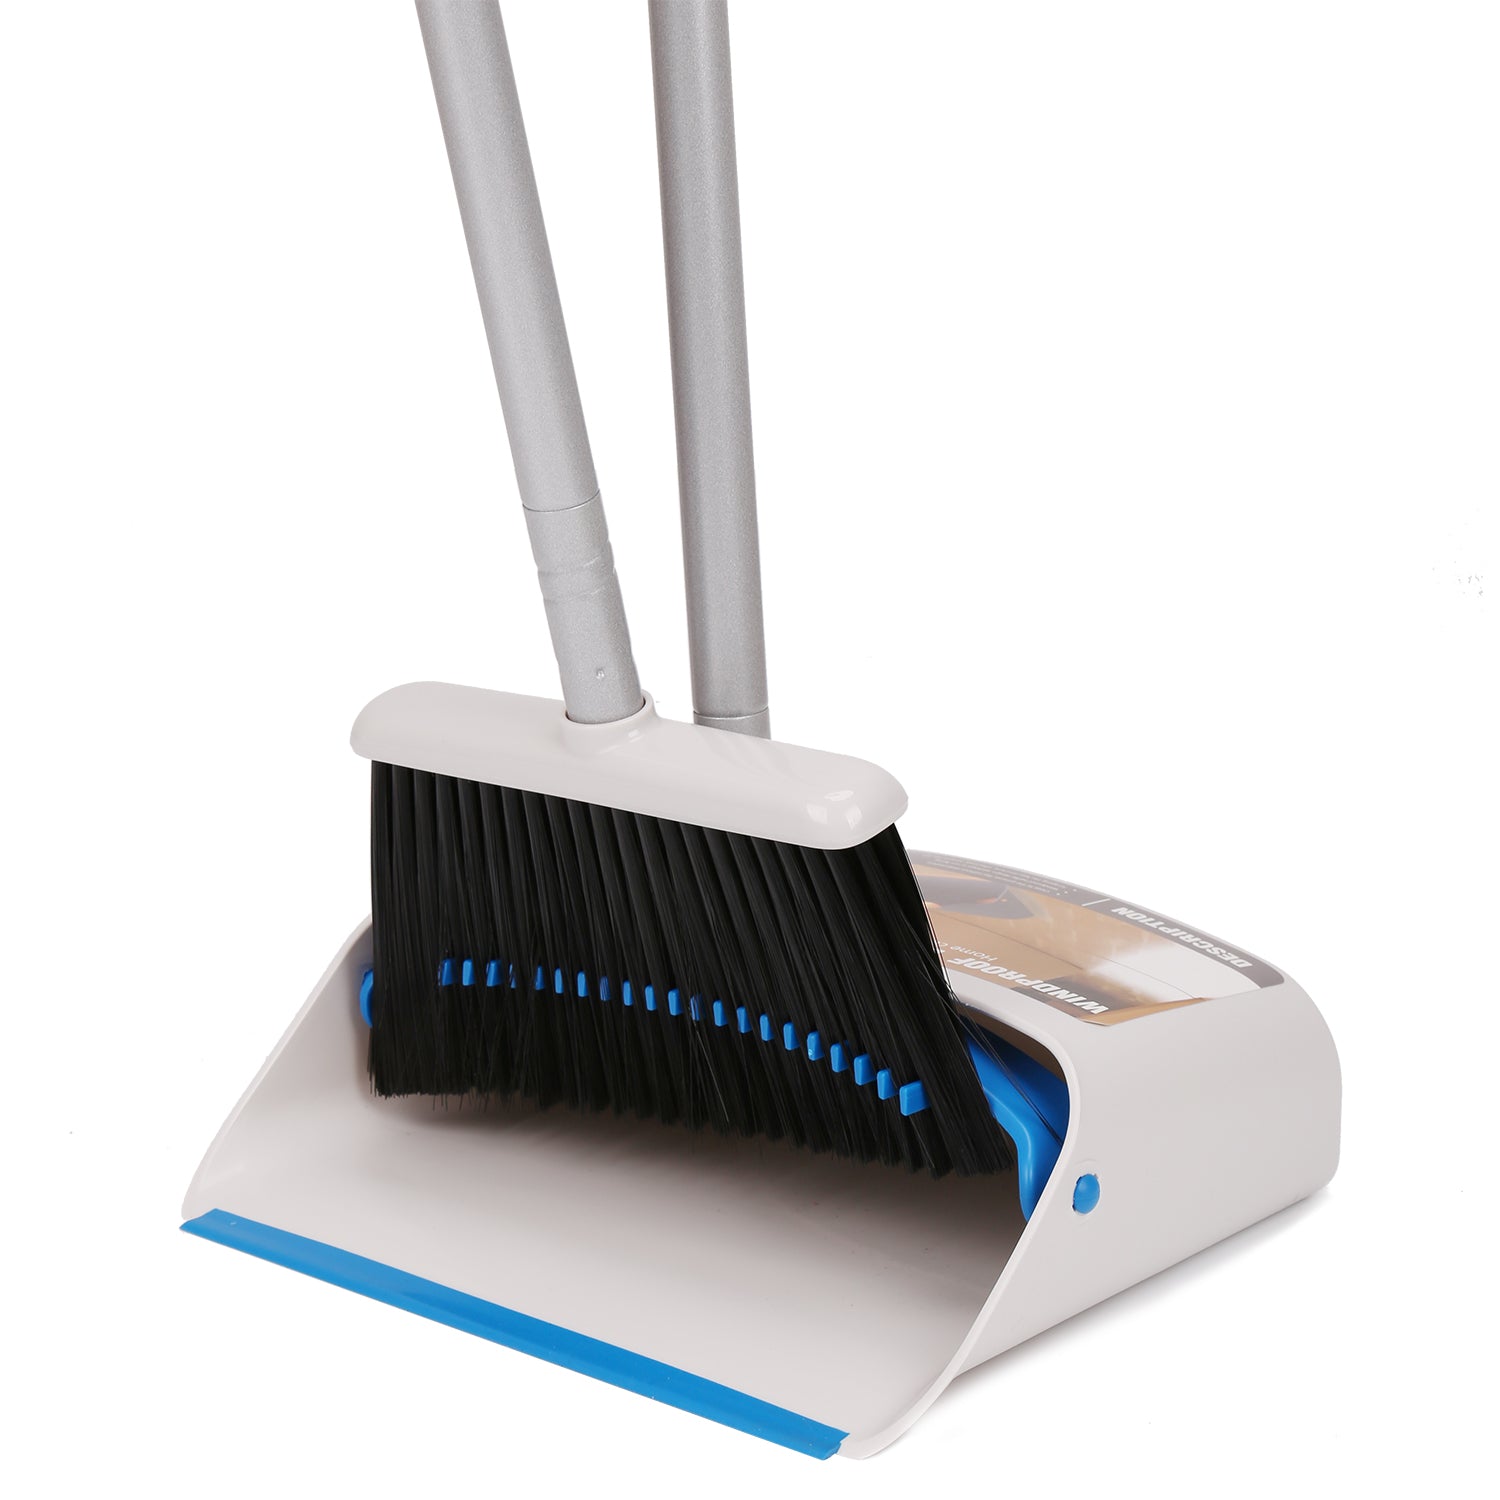 TreeLen Broom and Dustpan Set - Simplify Cleaning Your Home Ktichen Office  with Ease